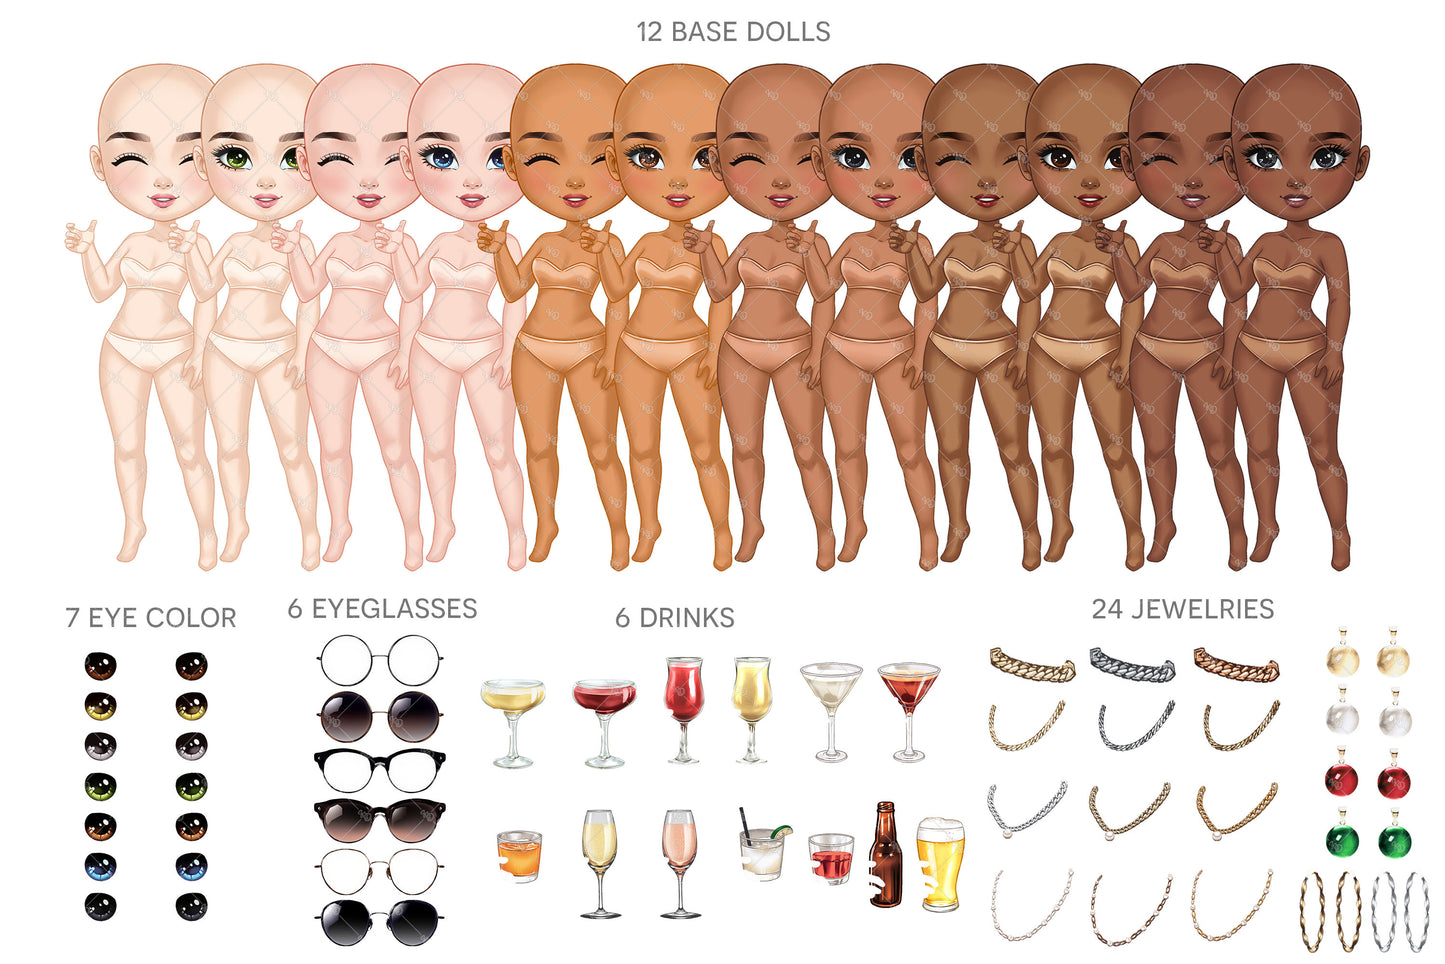 Chibi Best Friends Drinking Cocktail Clipart | Chibi Party Girls Sisters Night Out | Customizable Hair and Fashion Illustrations